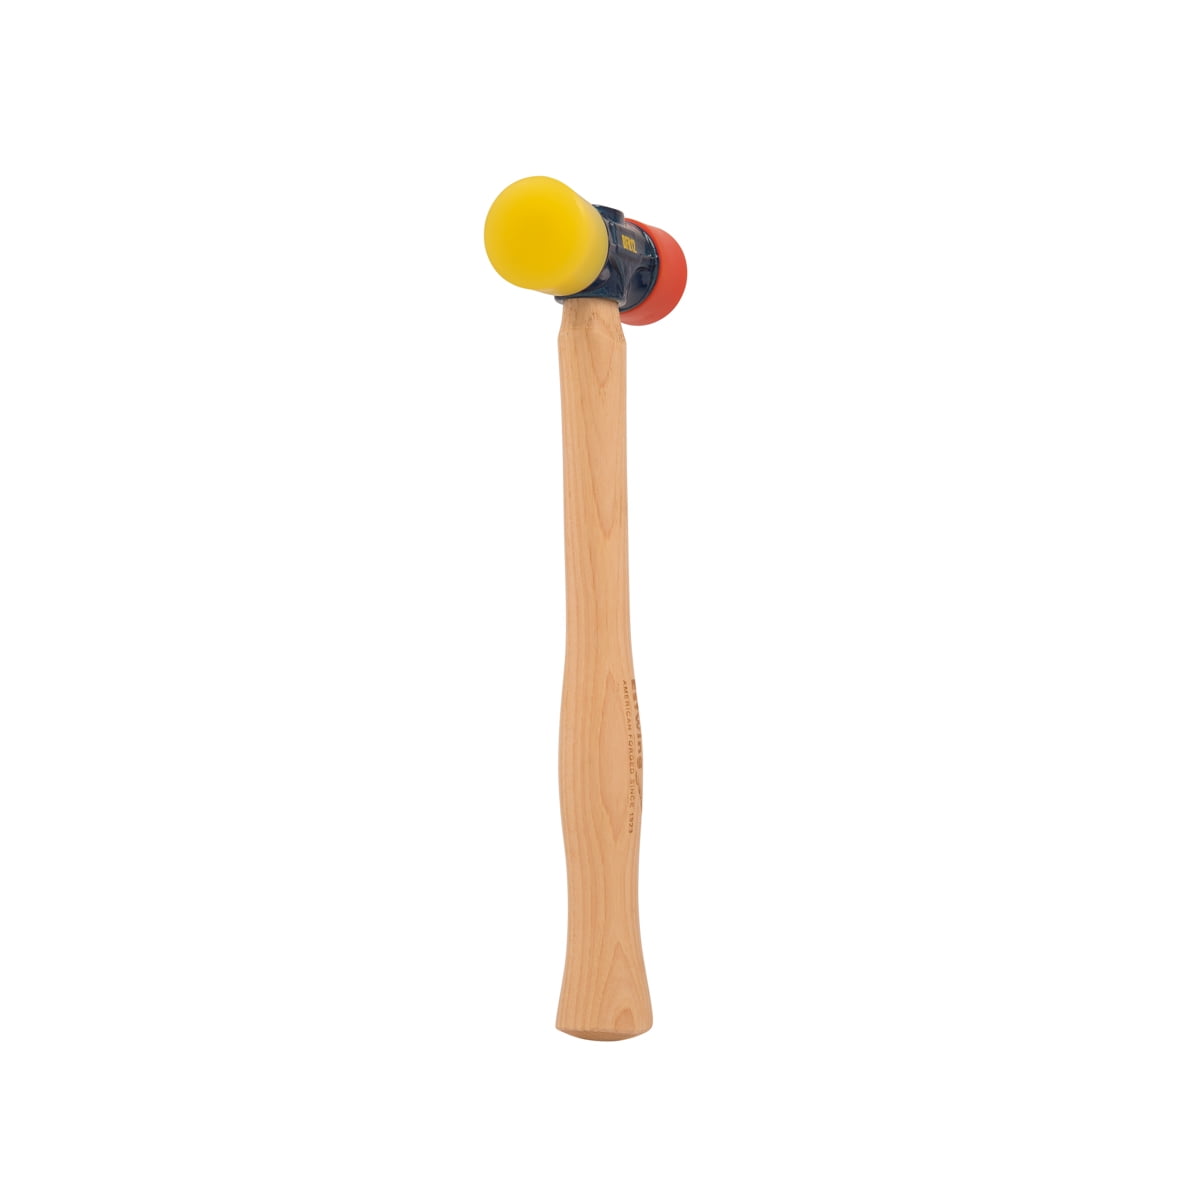 Estwing - DFH-12 Rubber Mallet - 12 oz Double-Face Hammer with Soft/Hard  Tips & Hickory Wood Handle - DFH12,Black Red & Yellow